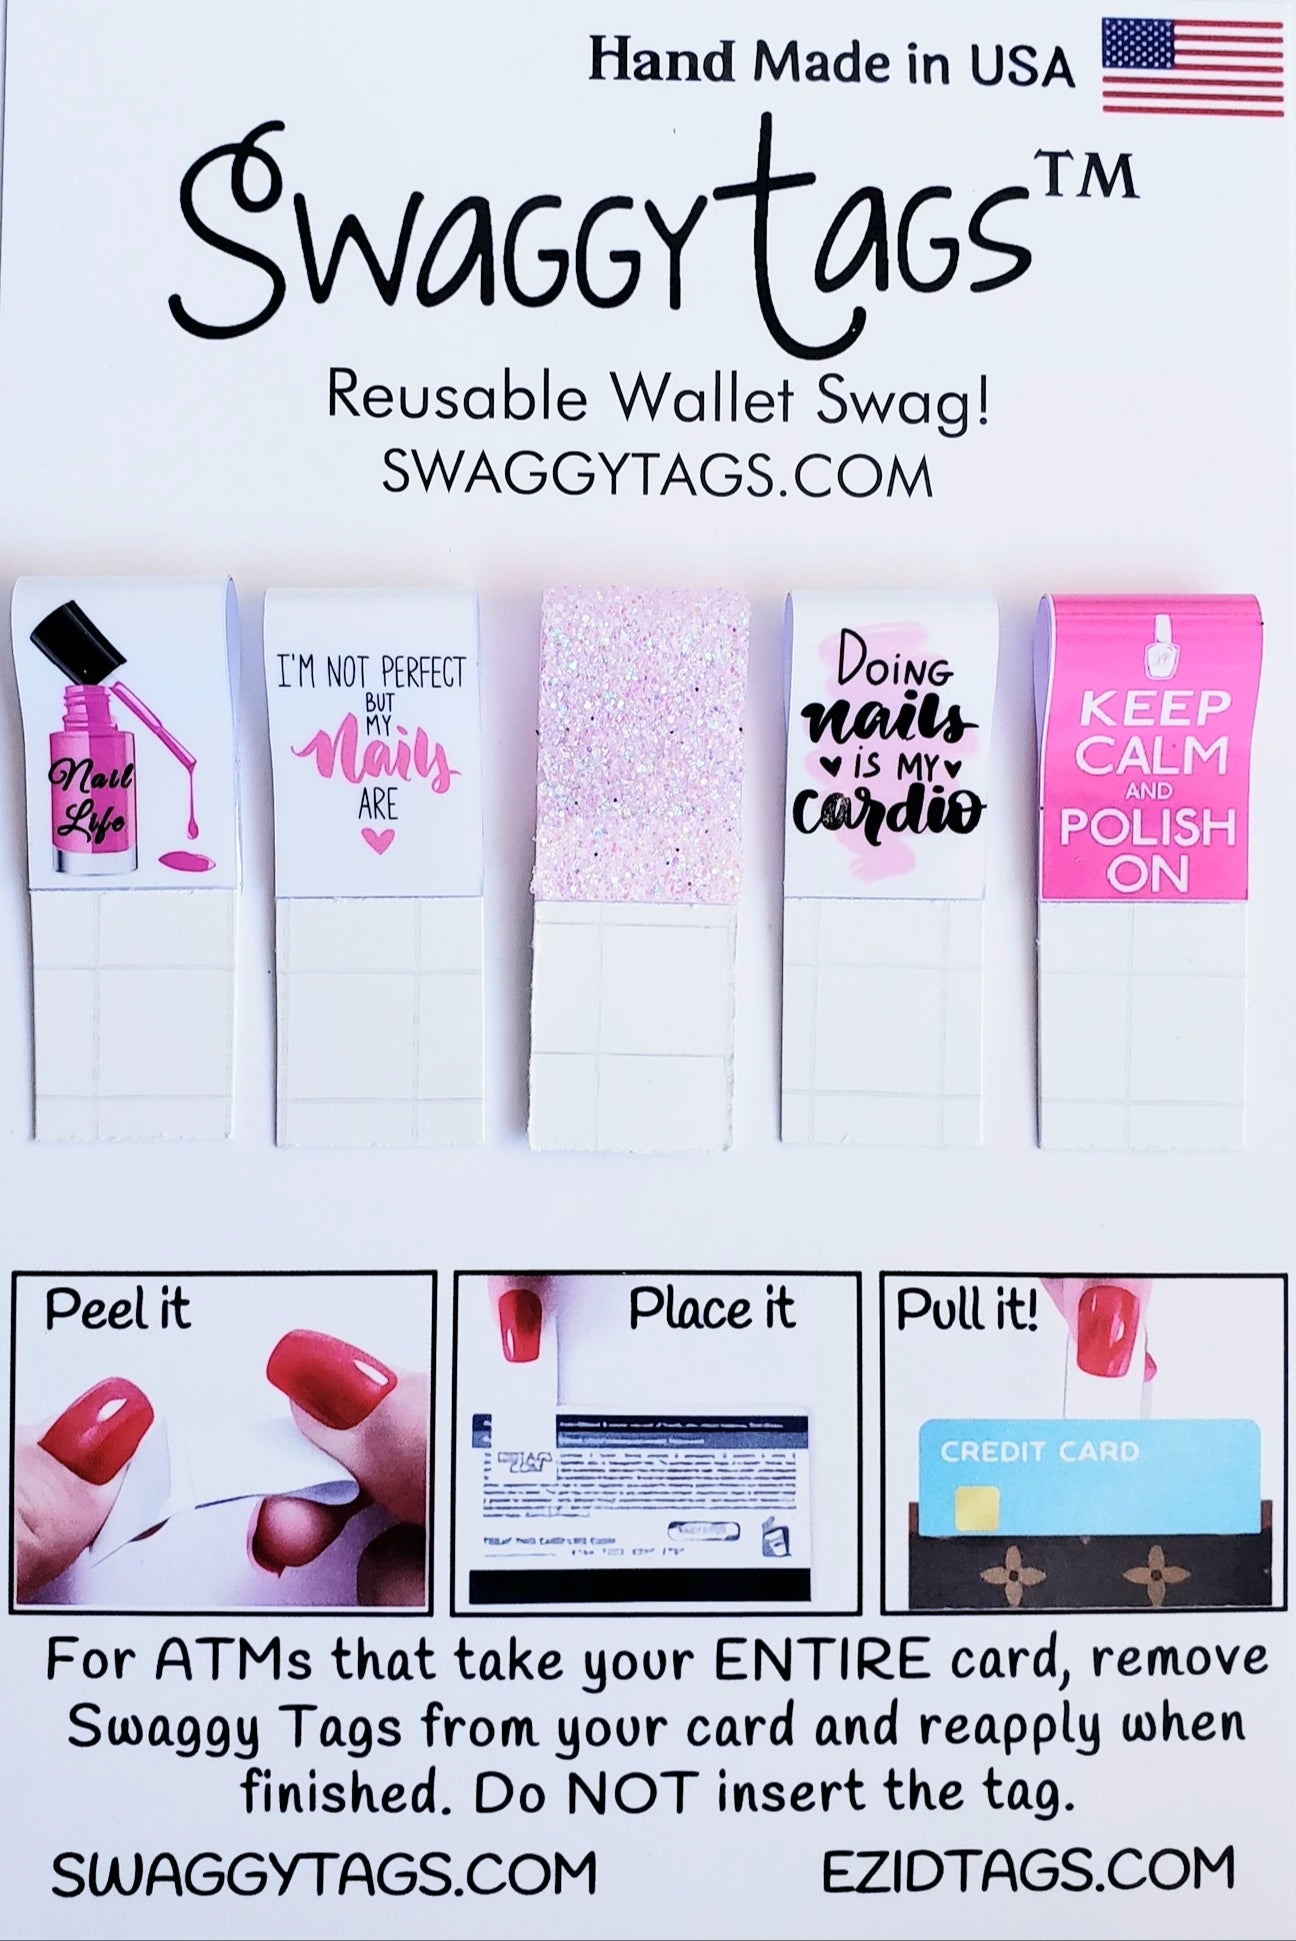 BIG BUNDLE THE PERFECT NAILS Swaggy Grabber Original Card Grabber & –  SWAGGY TAGS™️☆ SWAGGY GRABBER™️